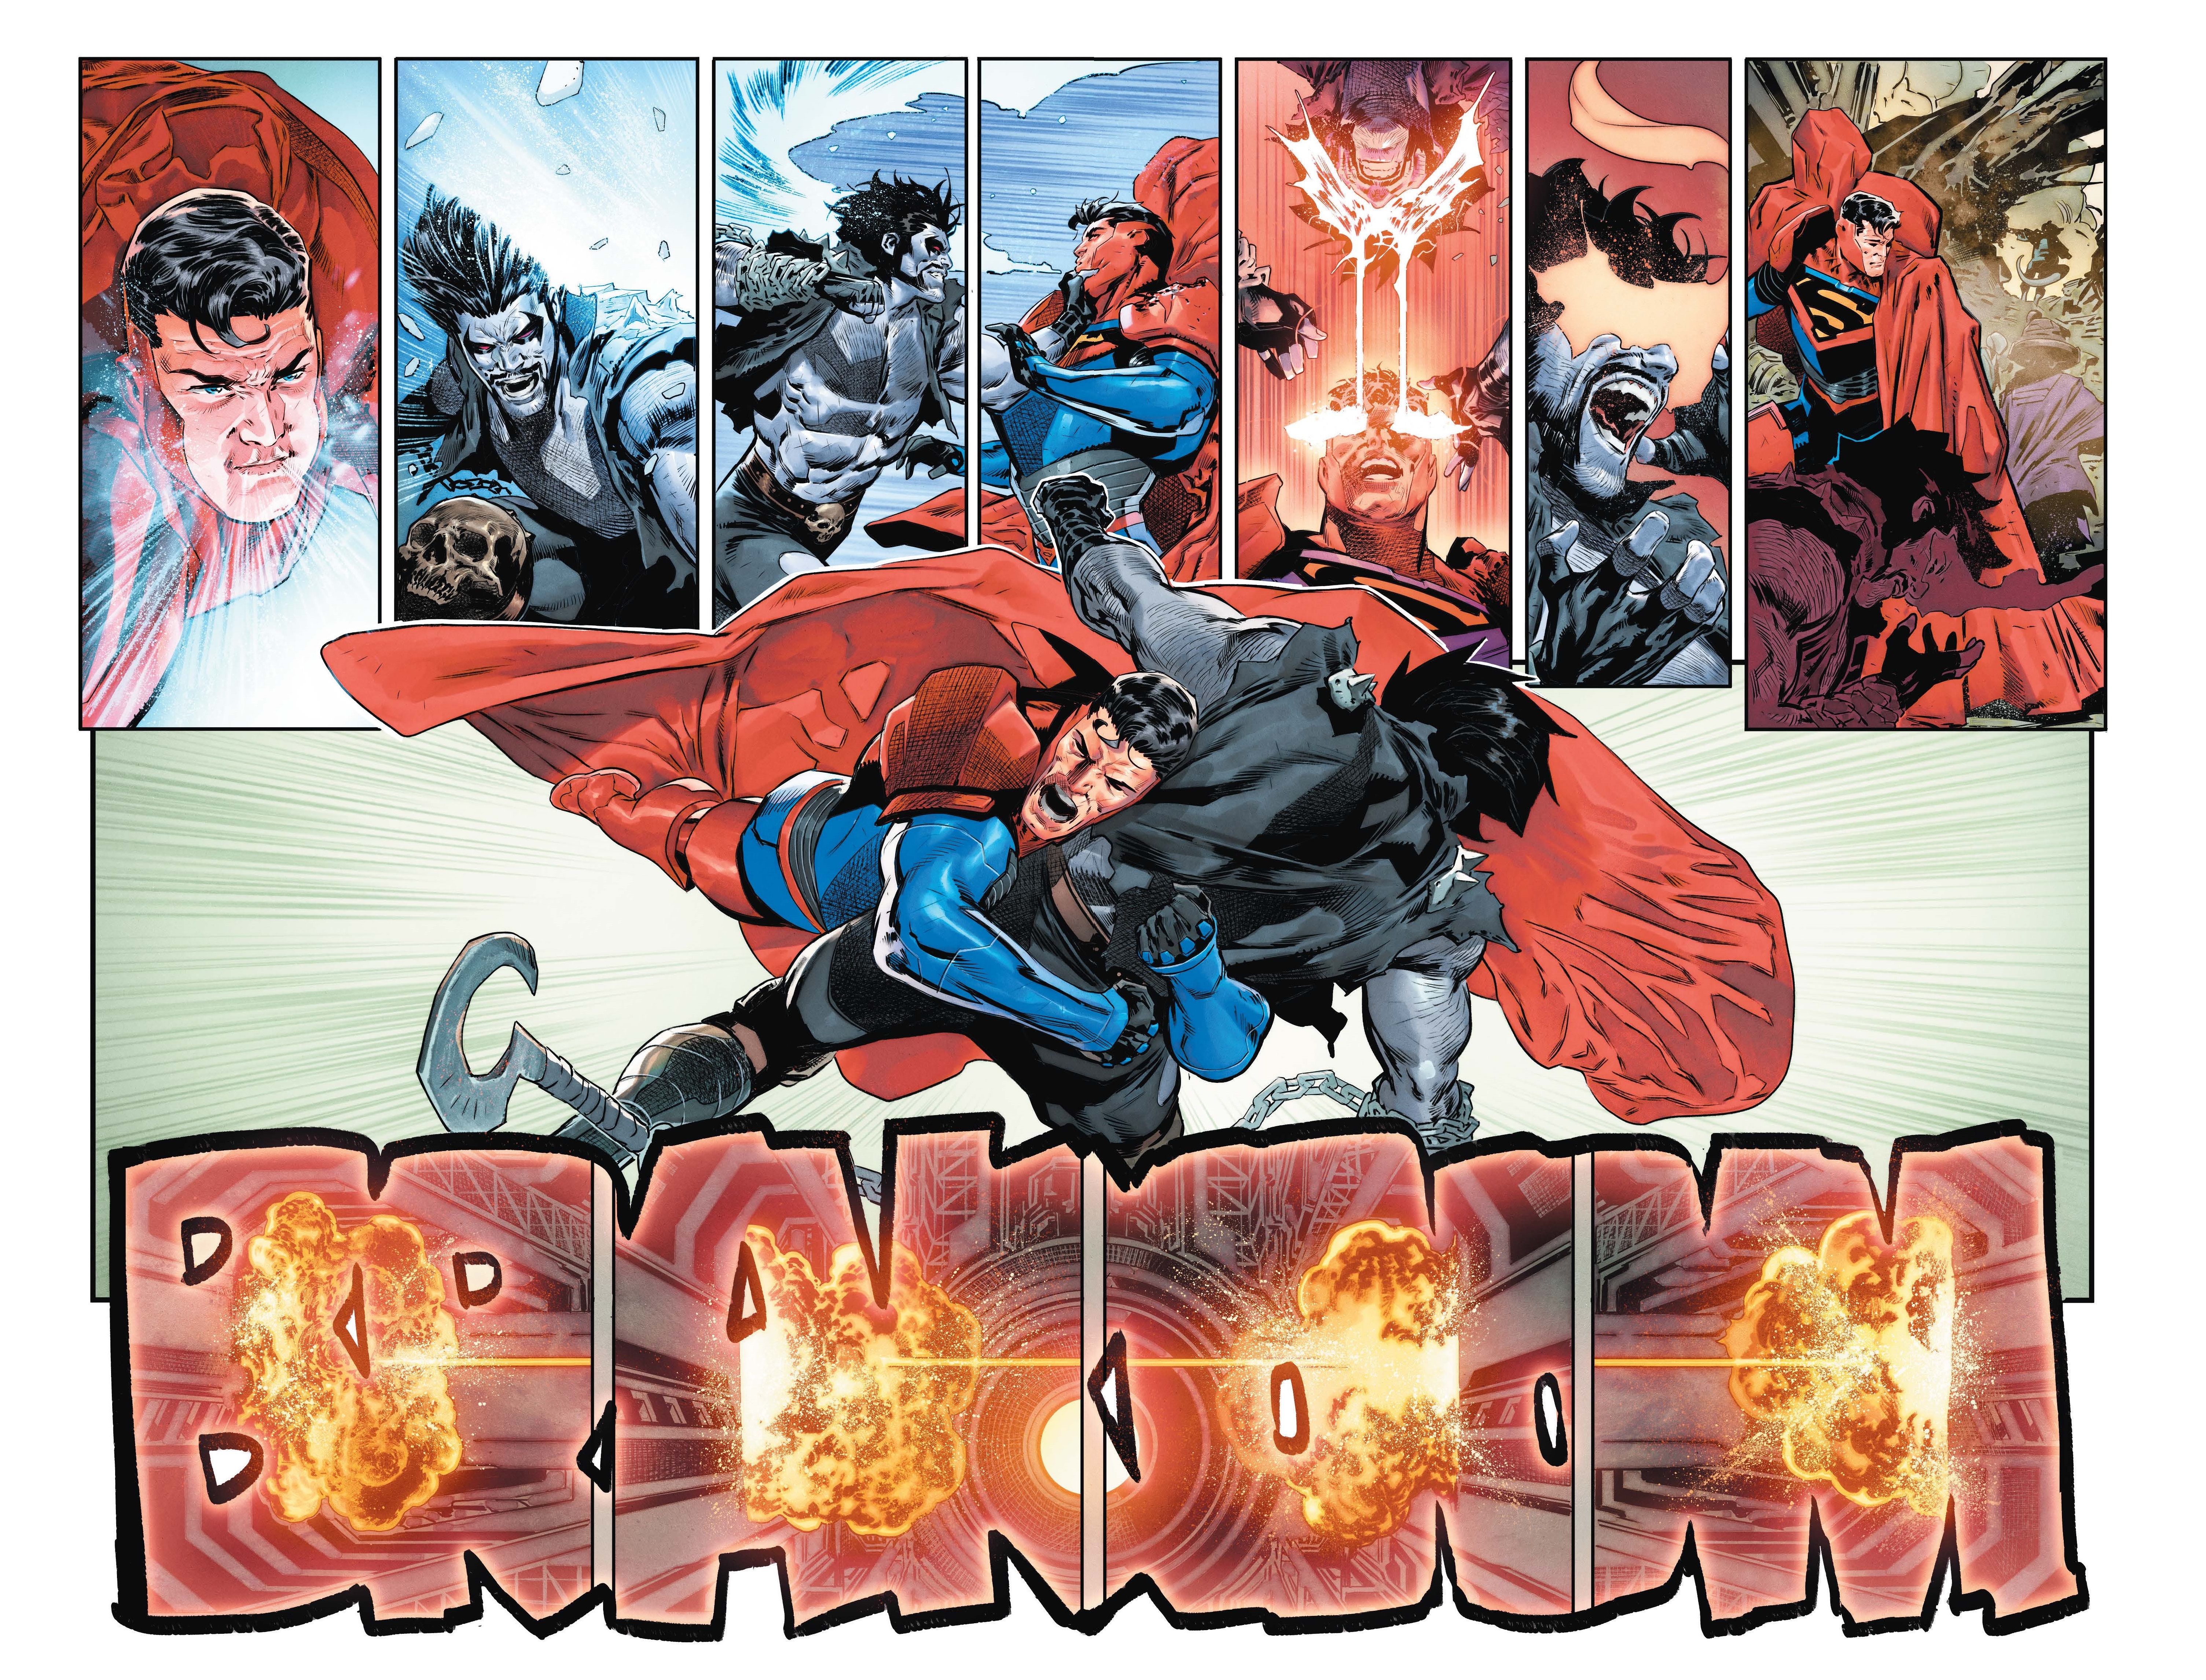 Art from Superman #14